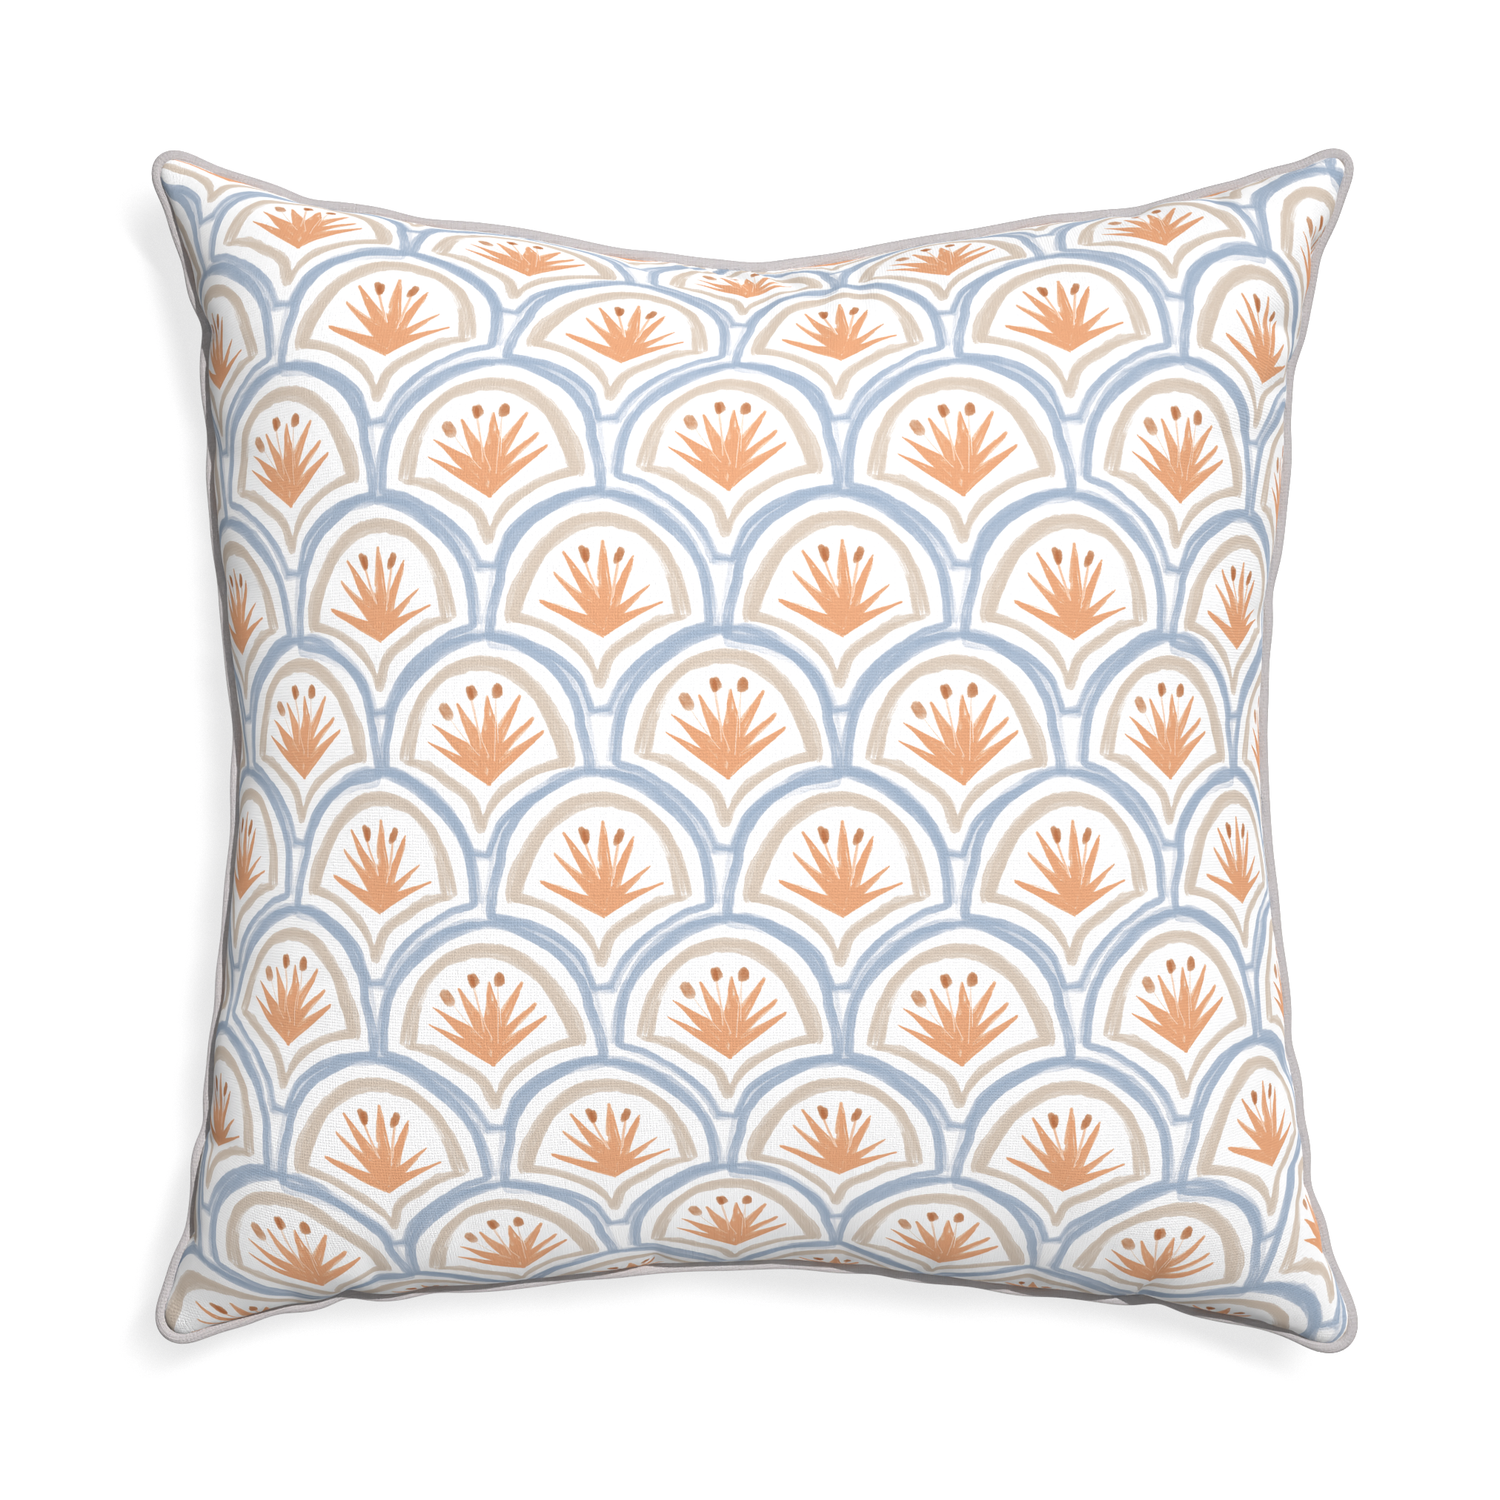 Euro-sham thatcher apricot custom art deco palm patternpillow with pebble piping on white background